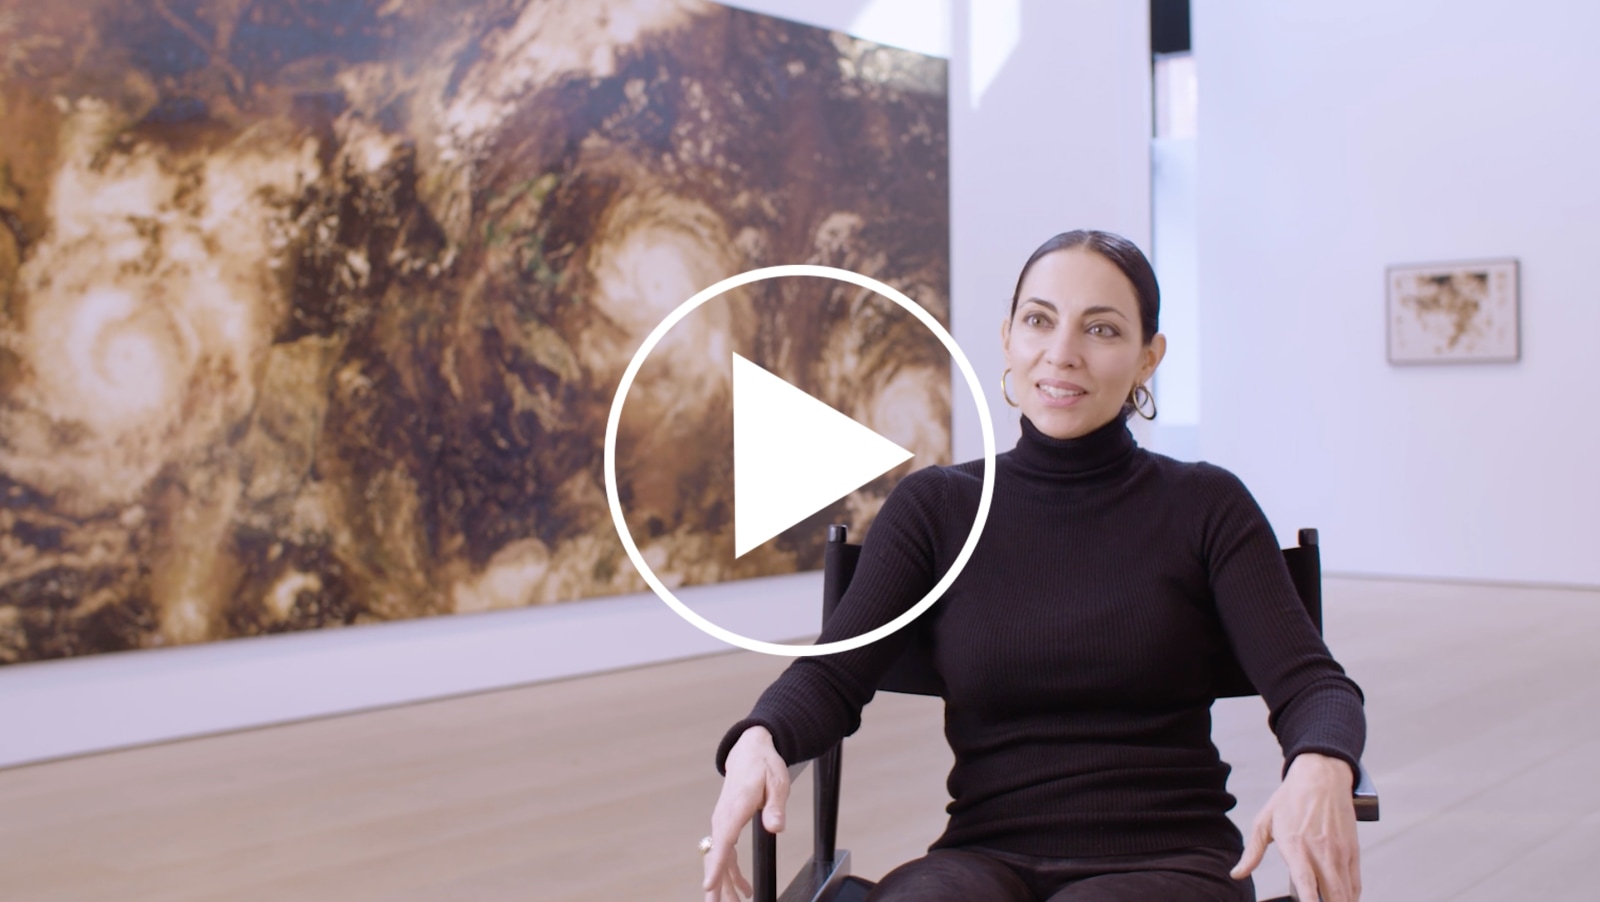 Teresita Fern&aacute;ndez on Maelstrom, Hear the artist&rsquo;s perspective on the research and ideas behind the exhibition. Film&nbsp;by Rava Films